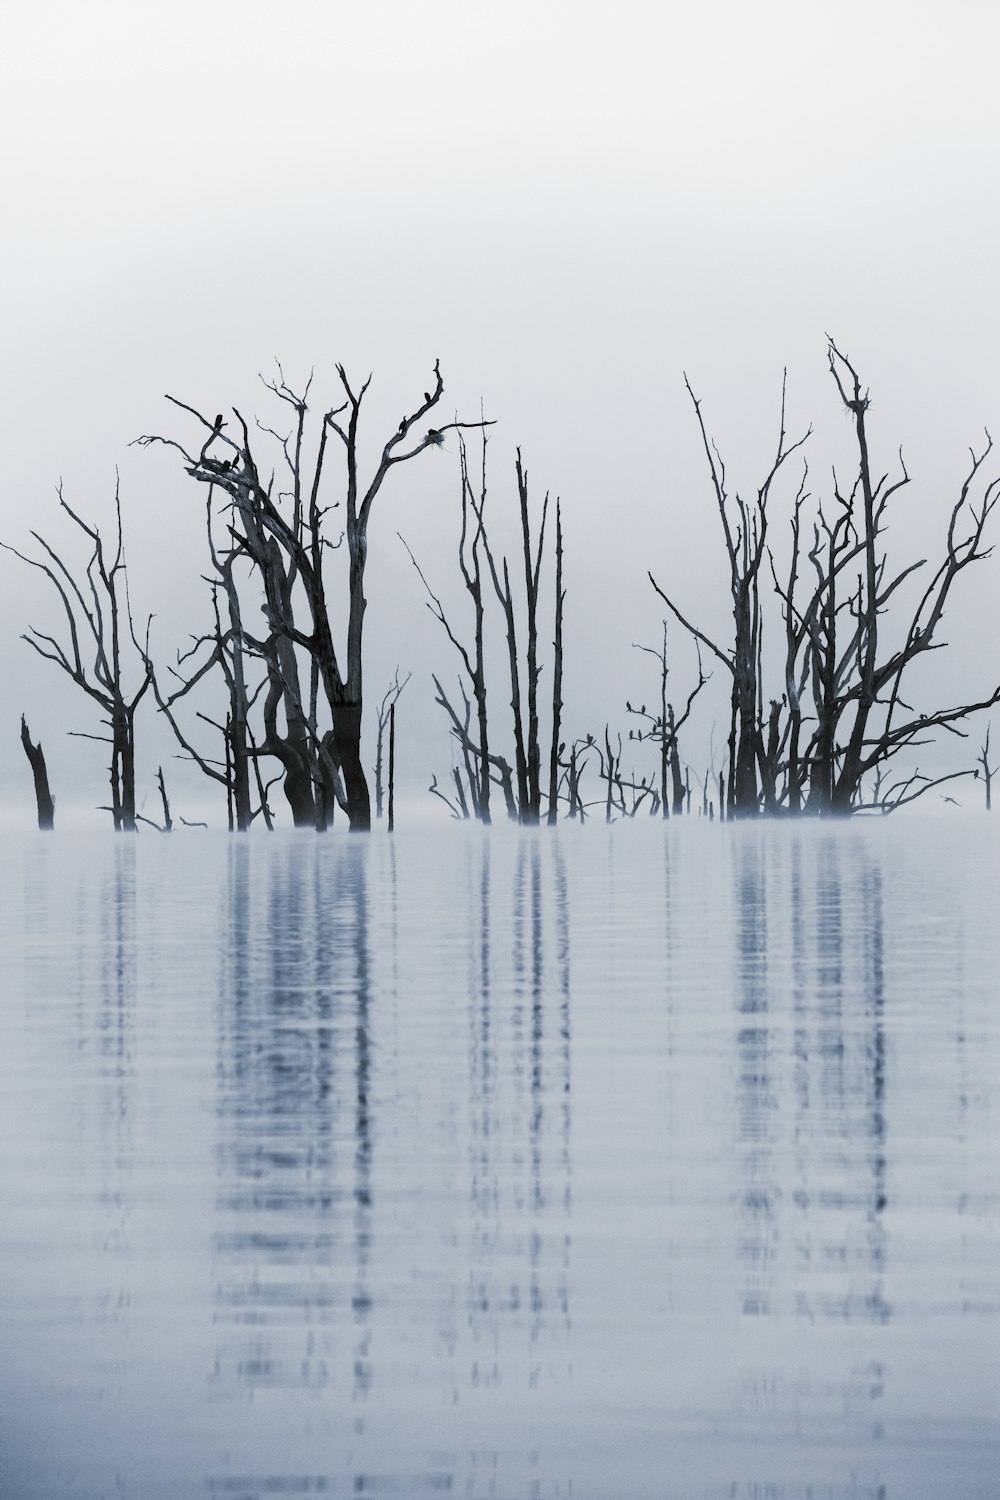 leafless tree on body of water